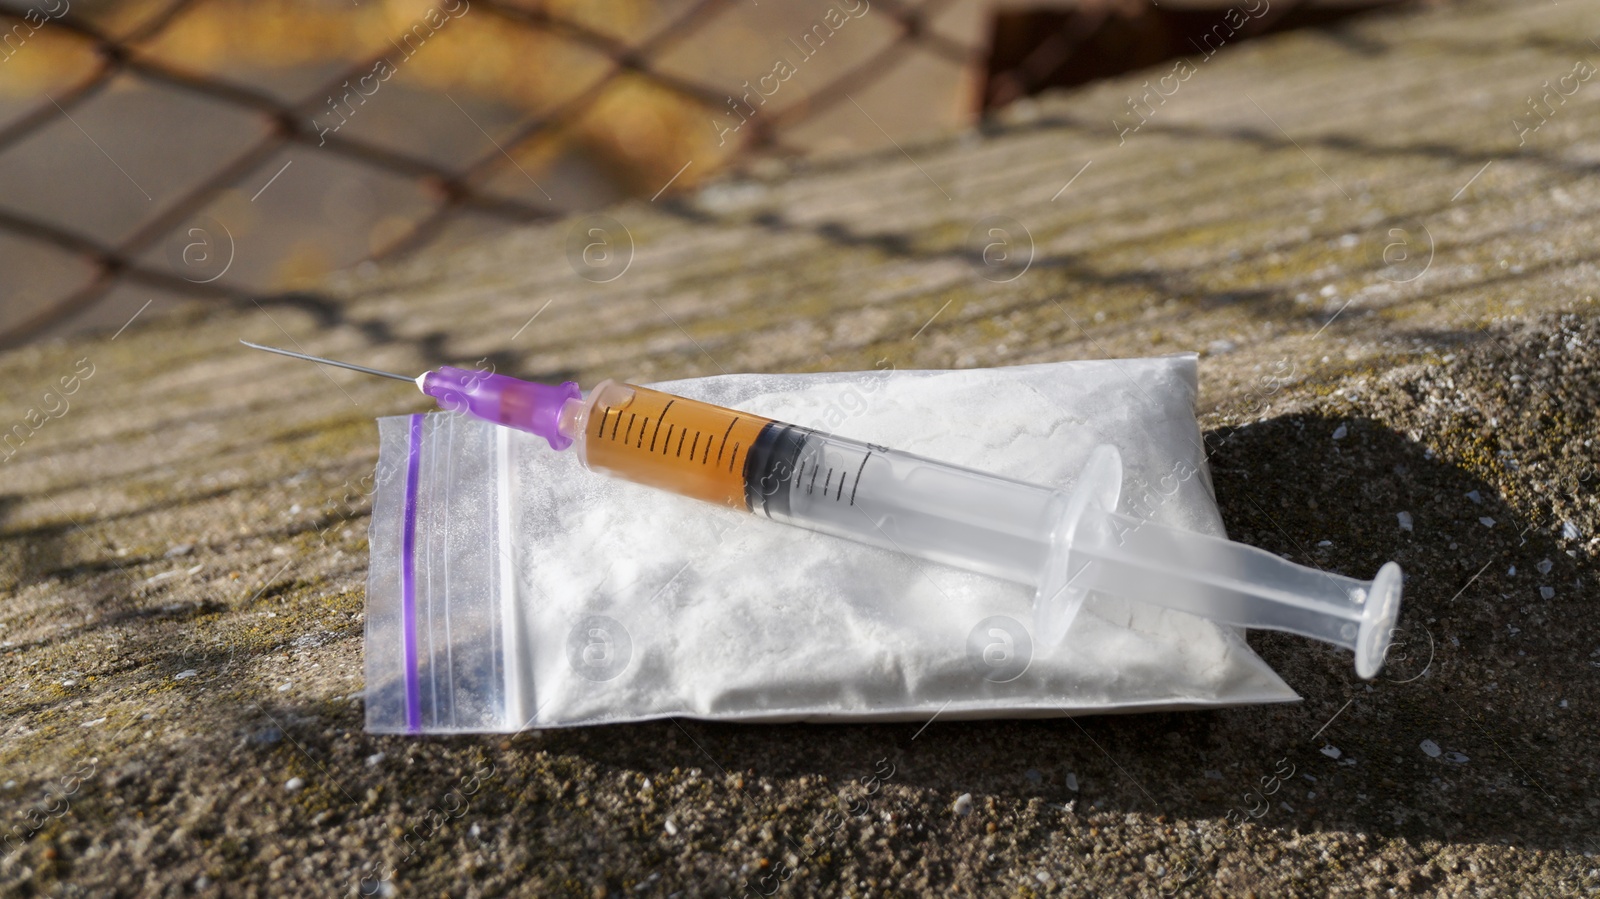 Photo of Plastic bag with powder and syringe on stone surface outdoors, closeup. Hard drugs